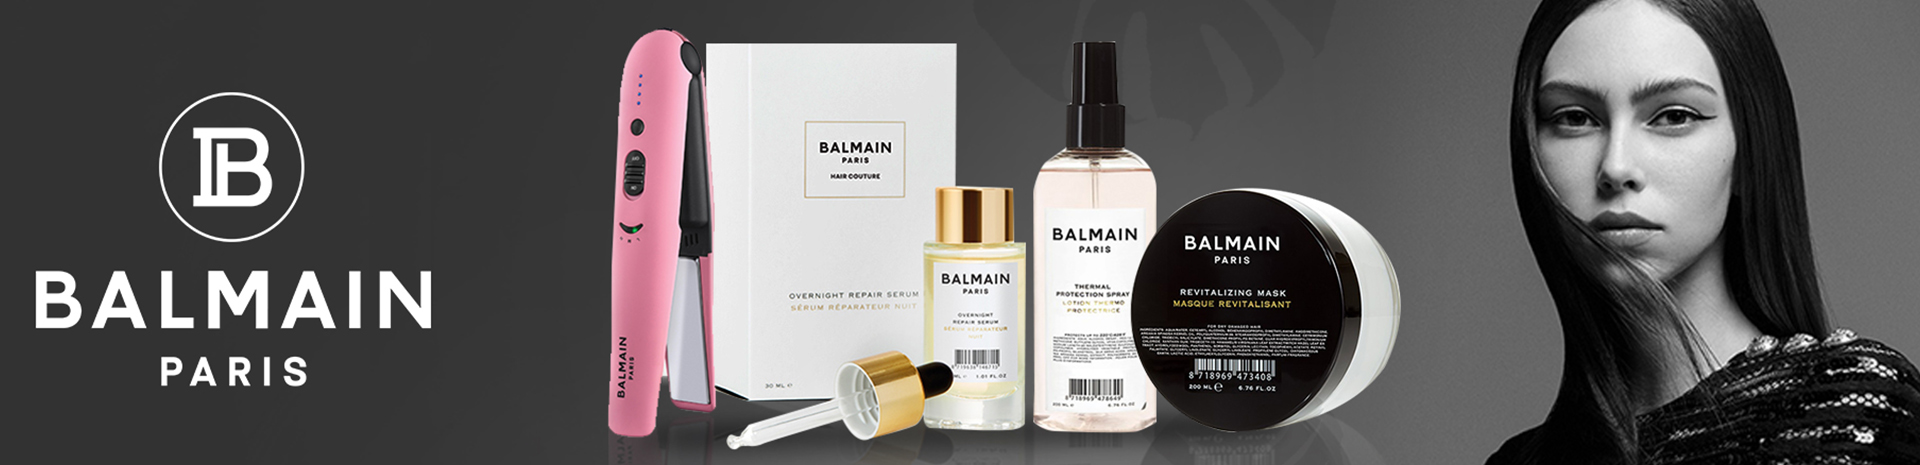 Buy Balmain Paris Hair Couture Online Products Collection at Best Prices -  Cossouq